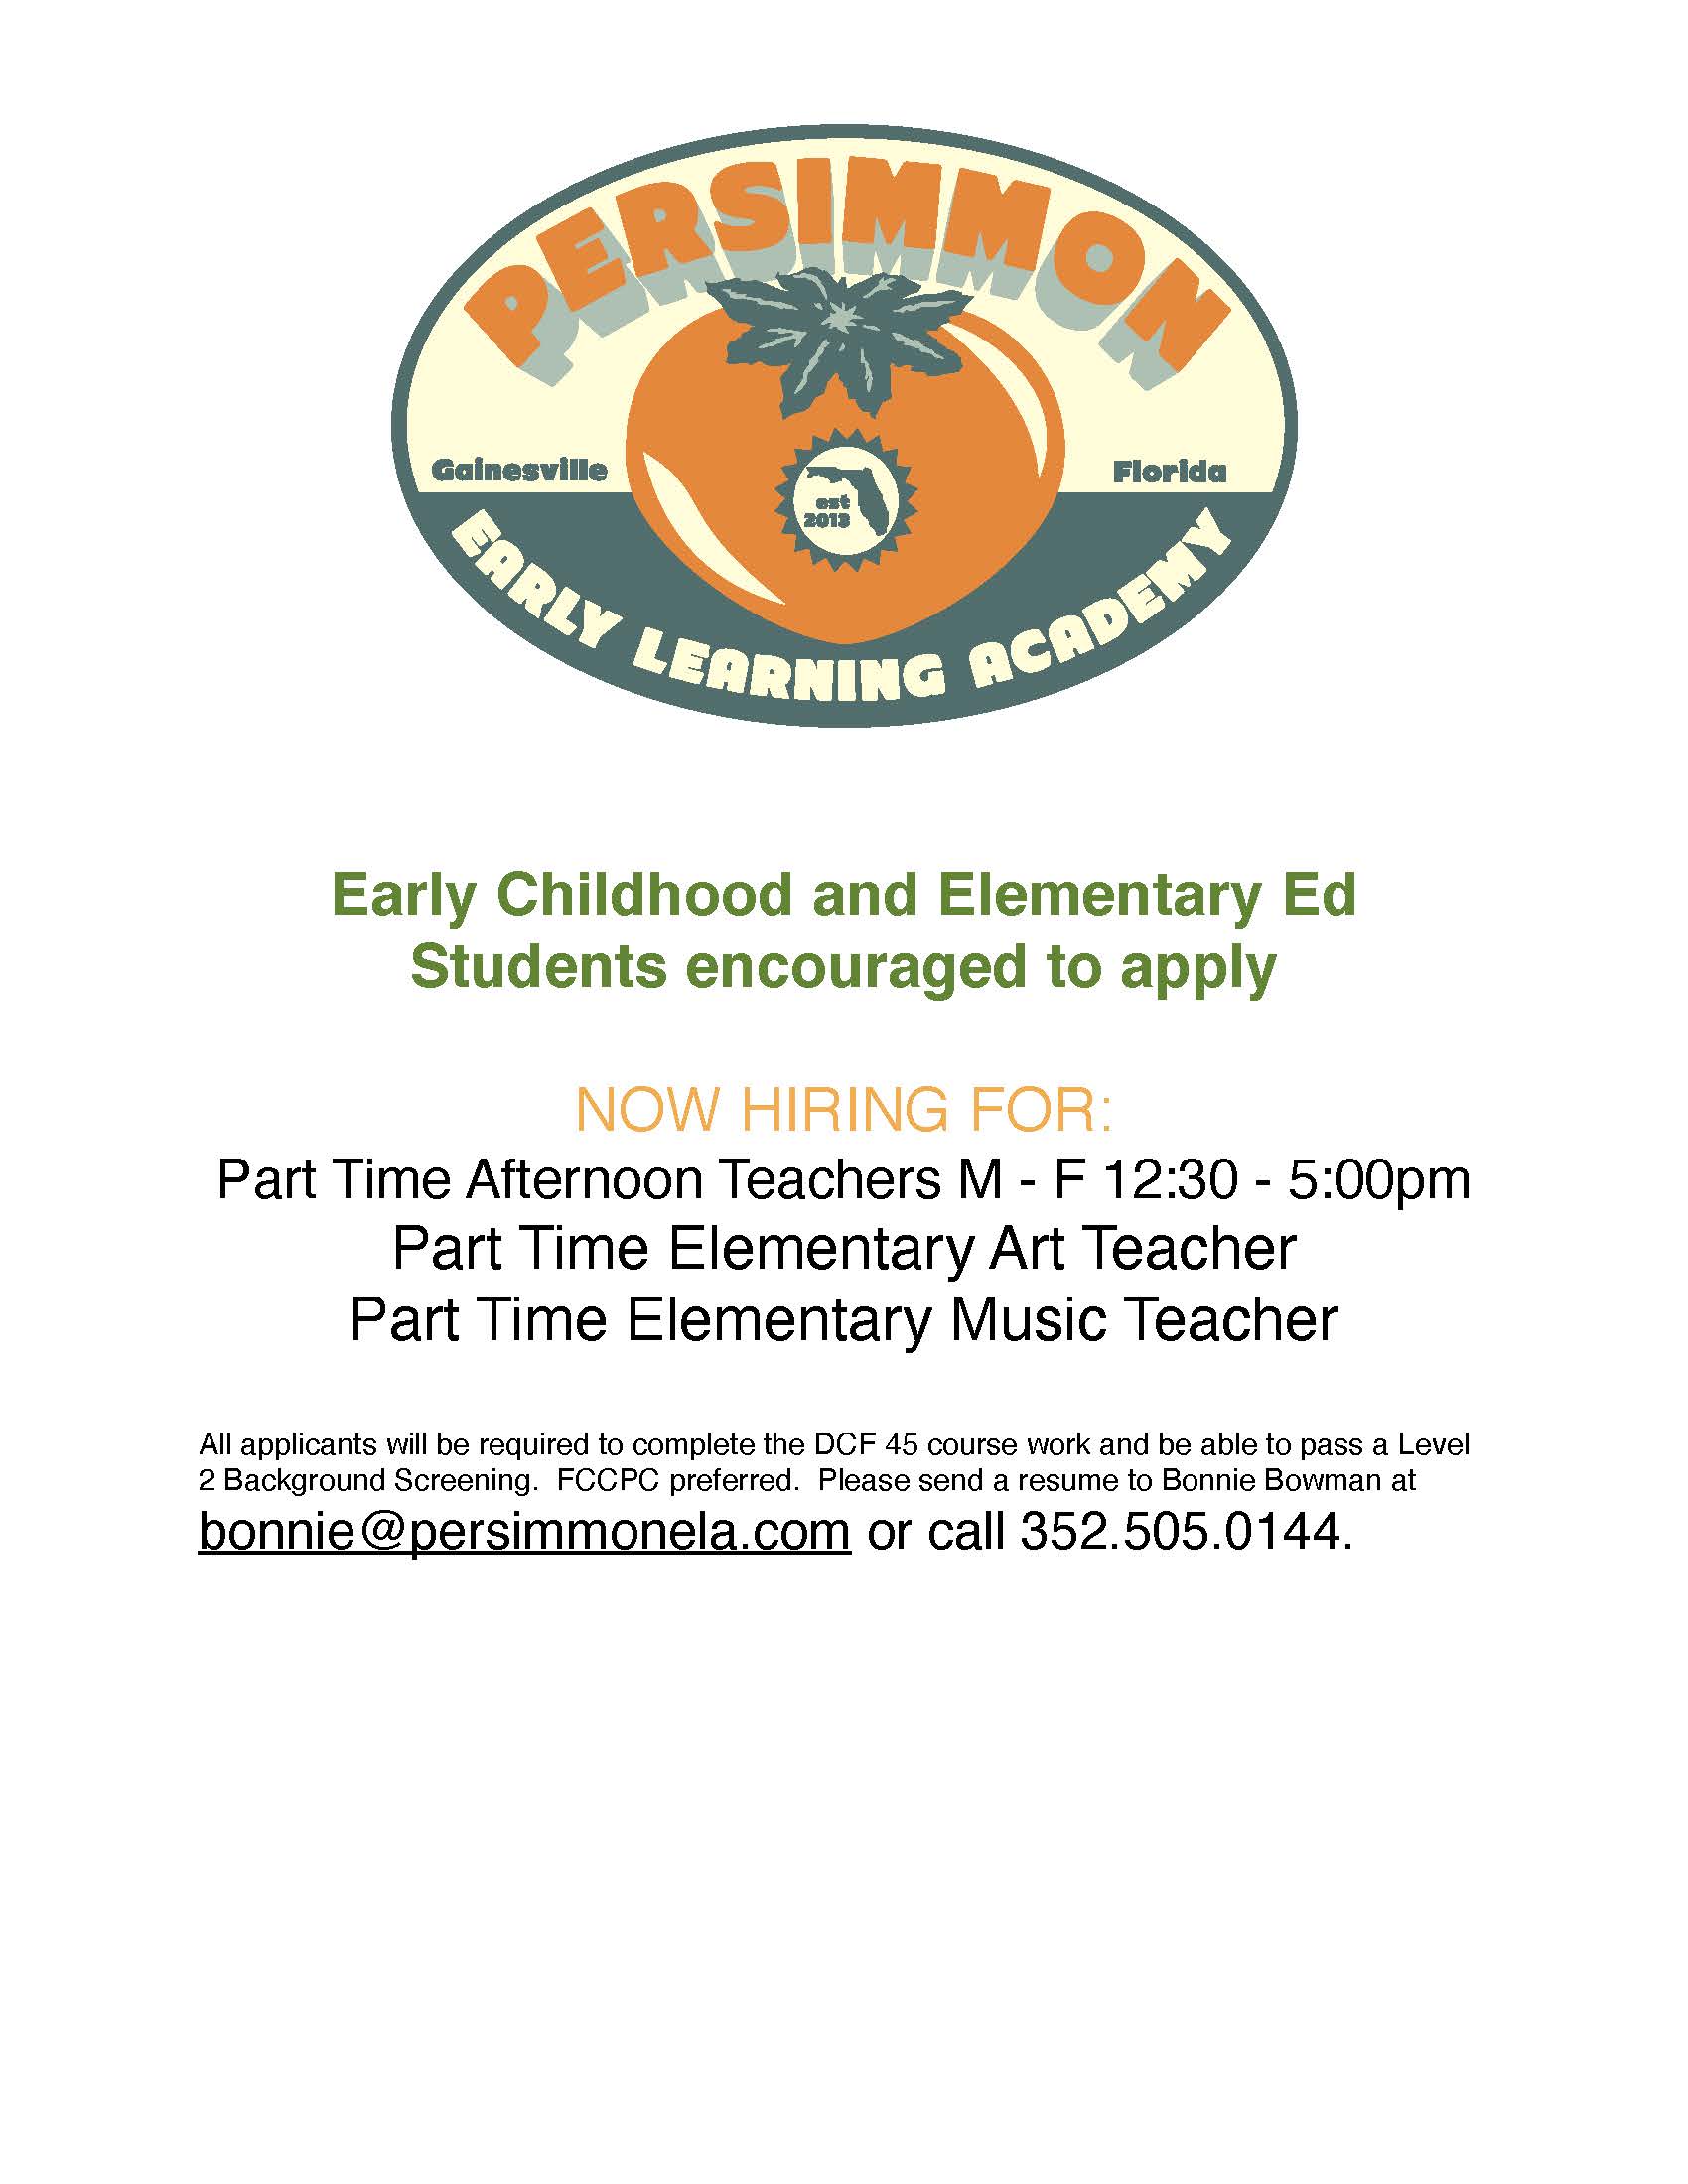 A flyer for part-time positions in Persimmon Early Learning Academy.